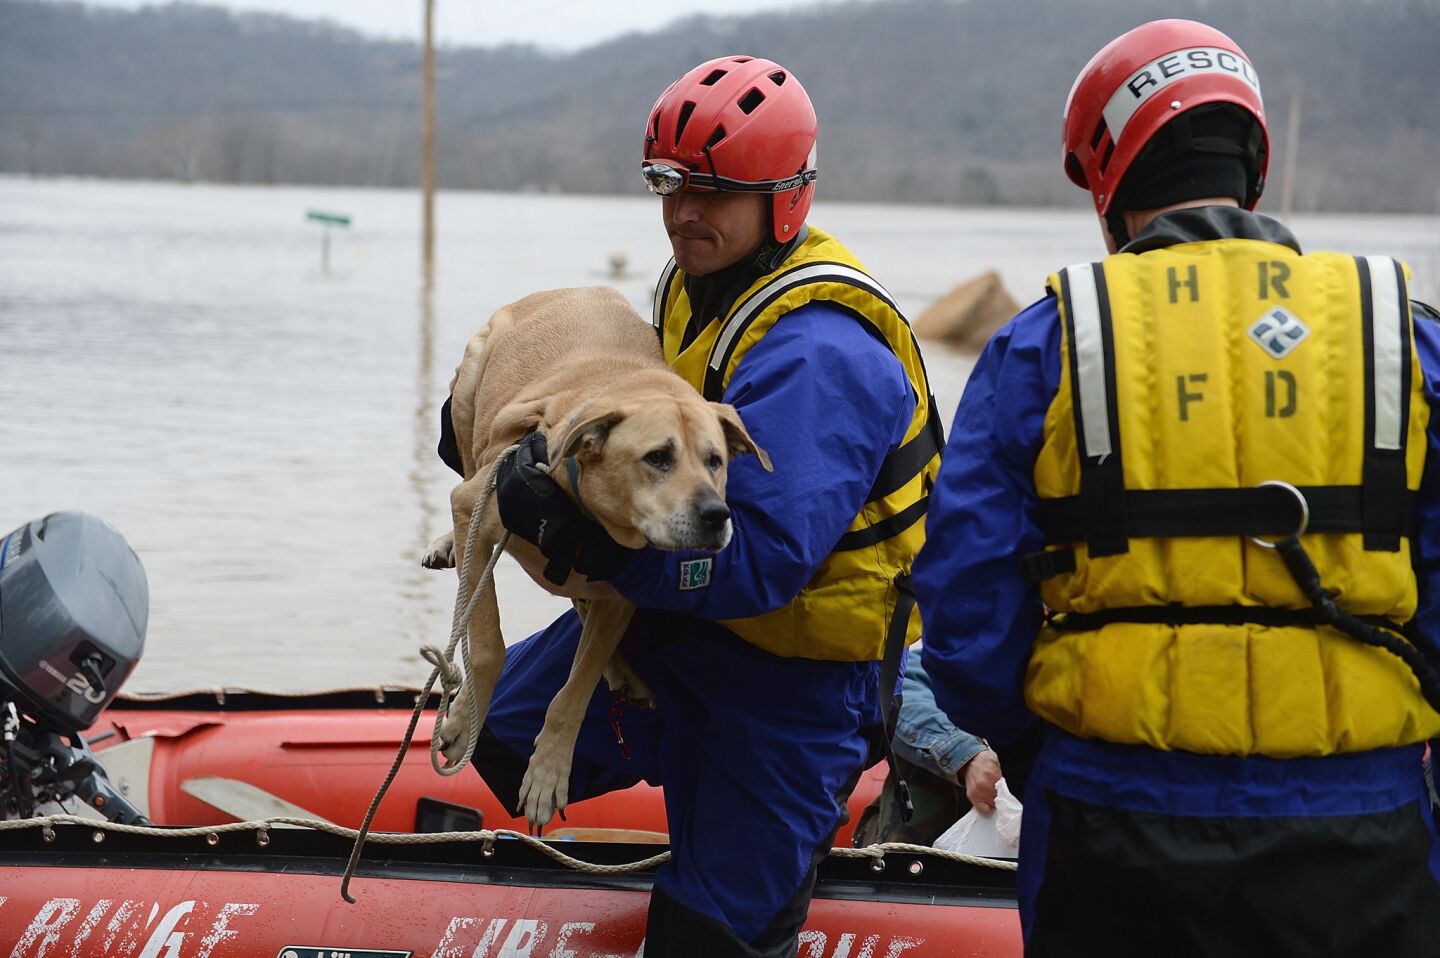 The High Ridge Fire Department rescues stranded residents and pets along the Meremac River in Eureka, Mo.